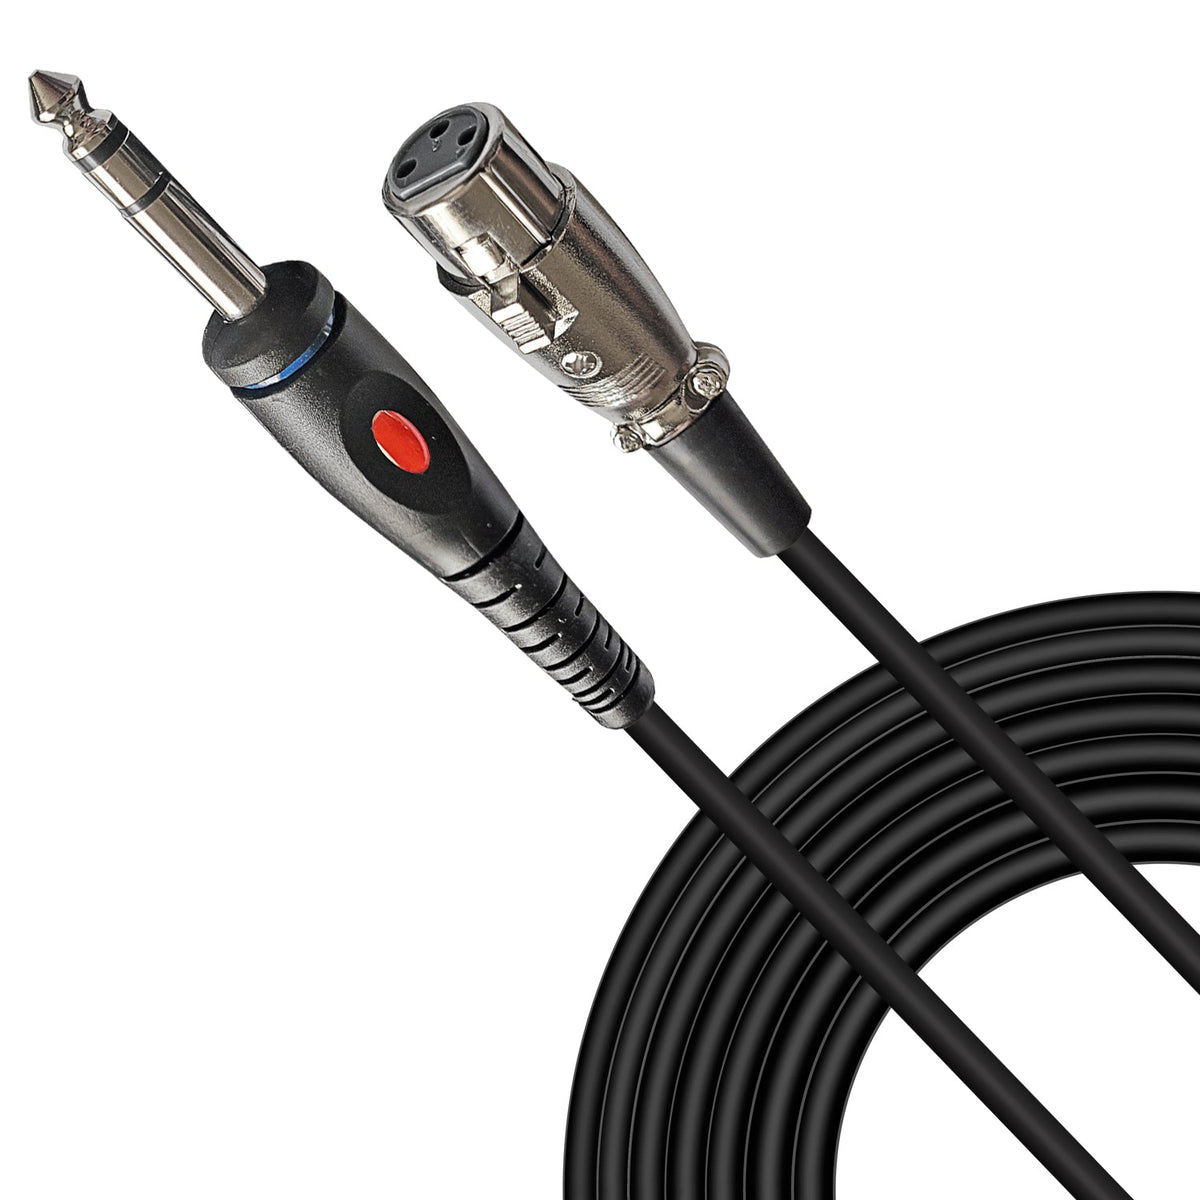 Cable XLR